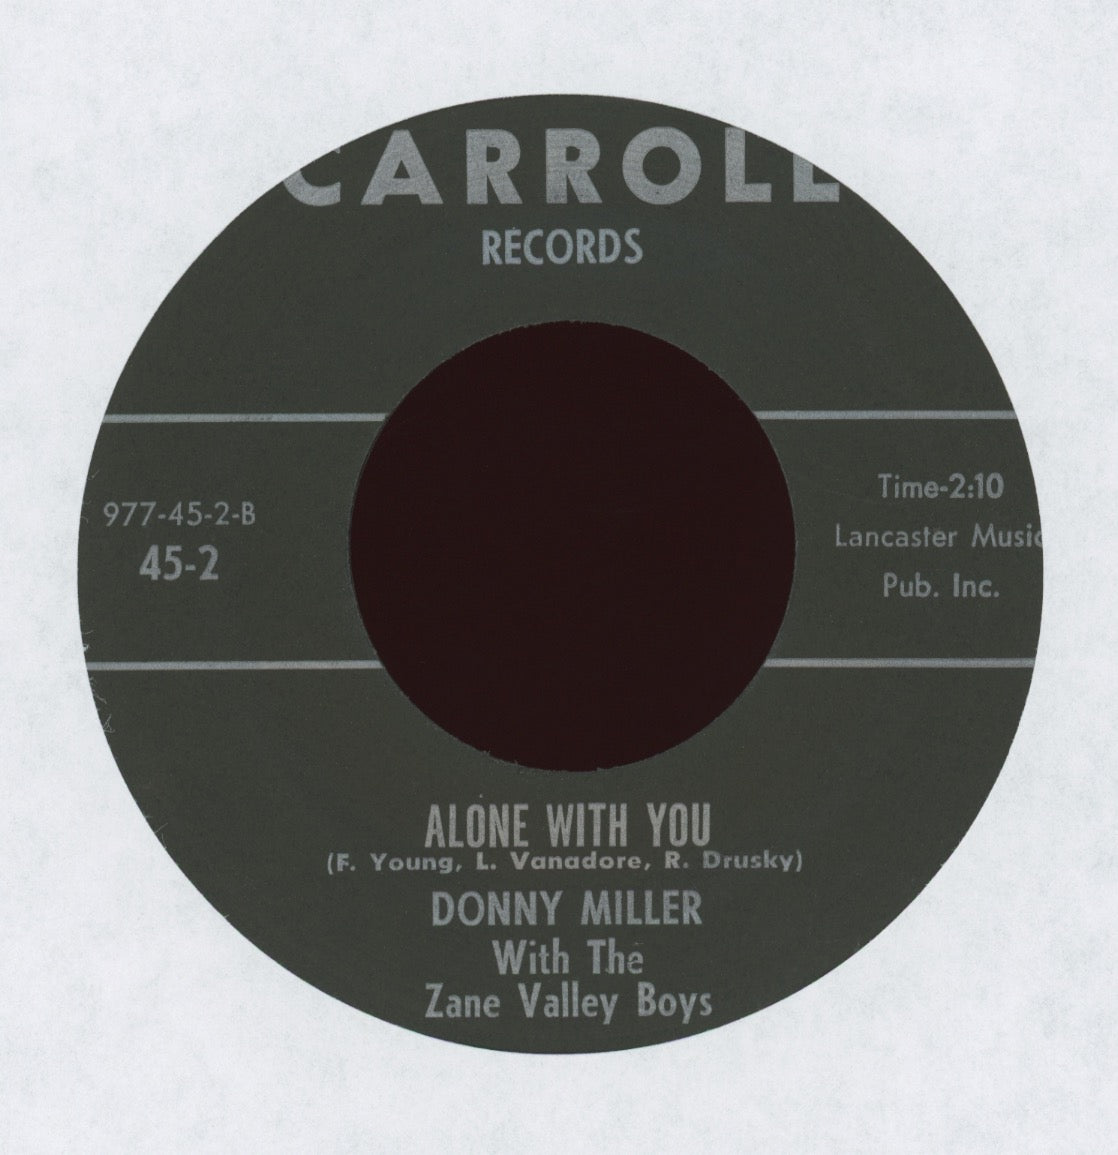 Donny Miller - Alone With You on Carroll